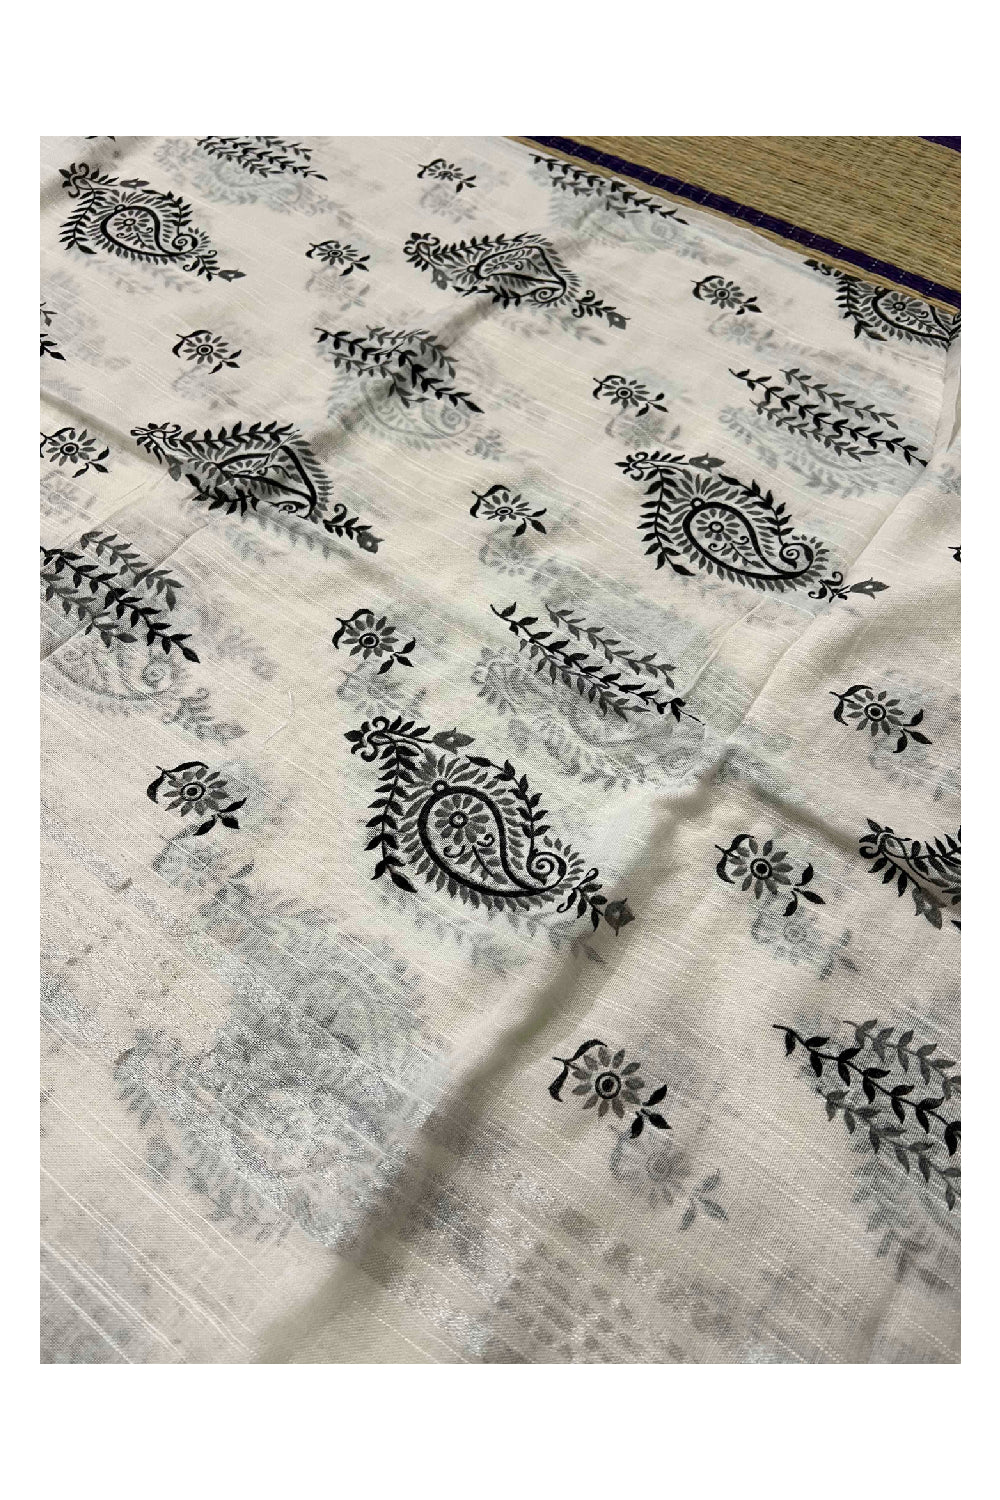 Southloom Linen Designer Saree in White and Black Printed with Tassels